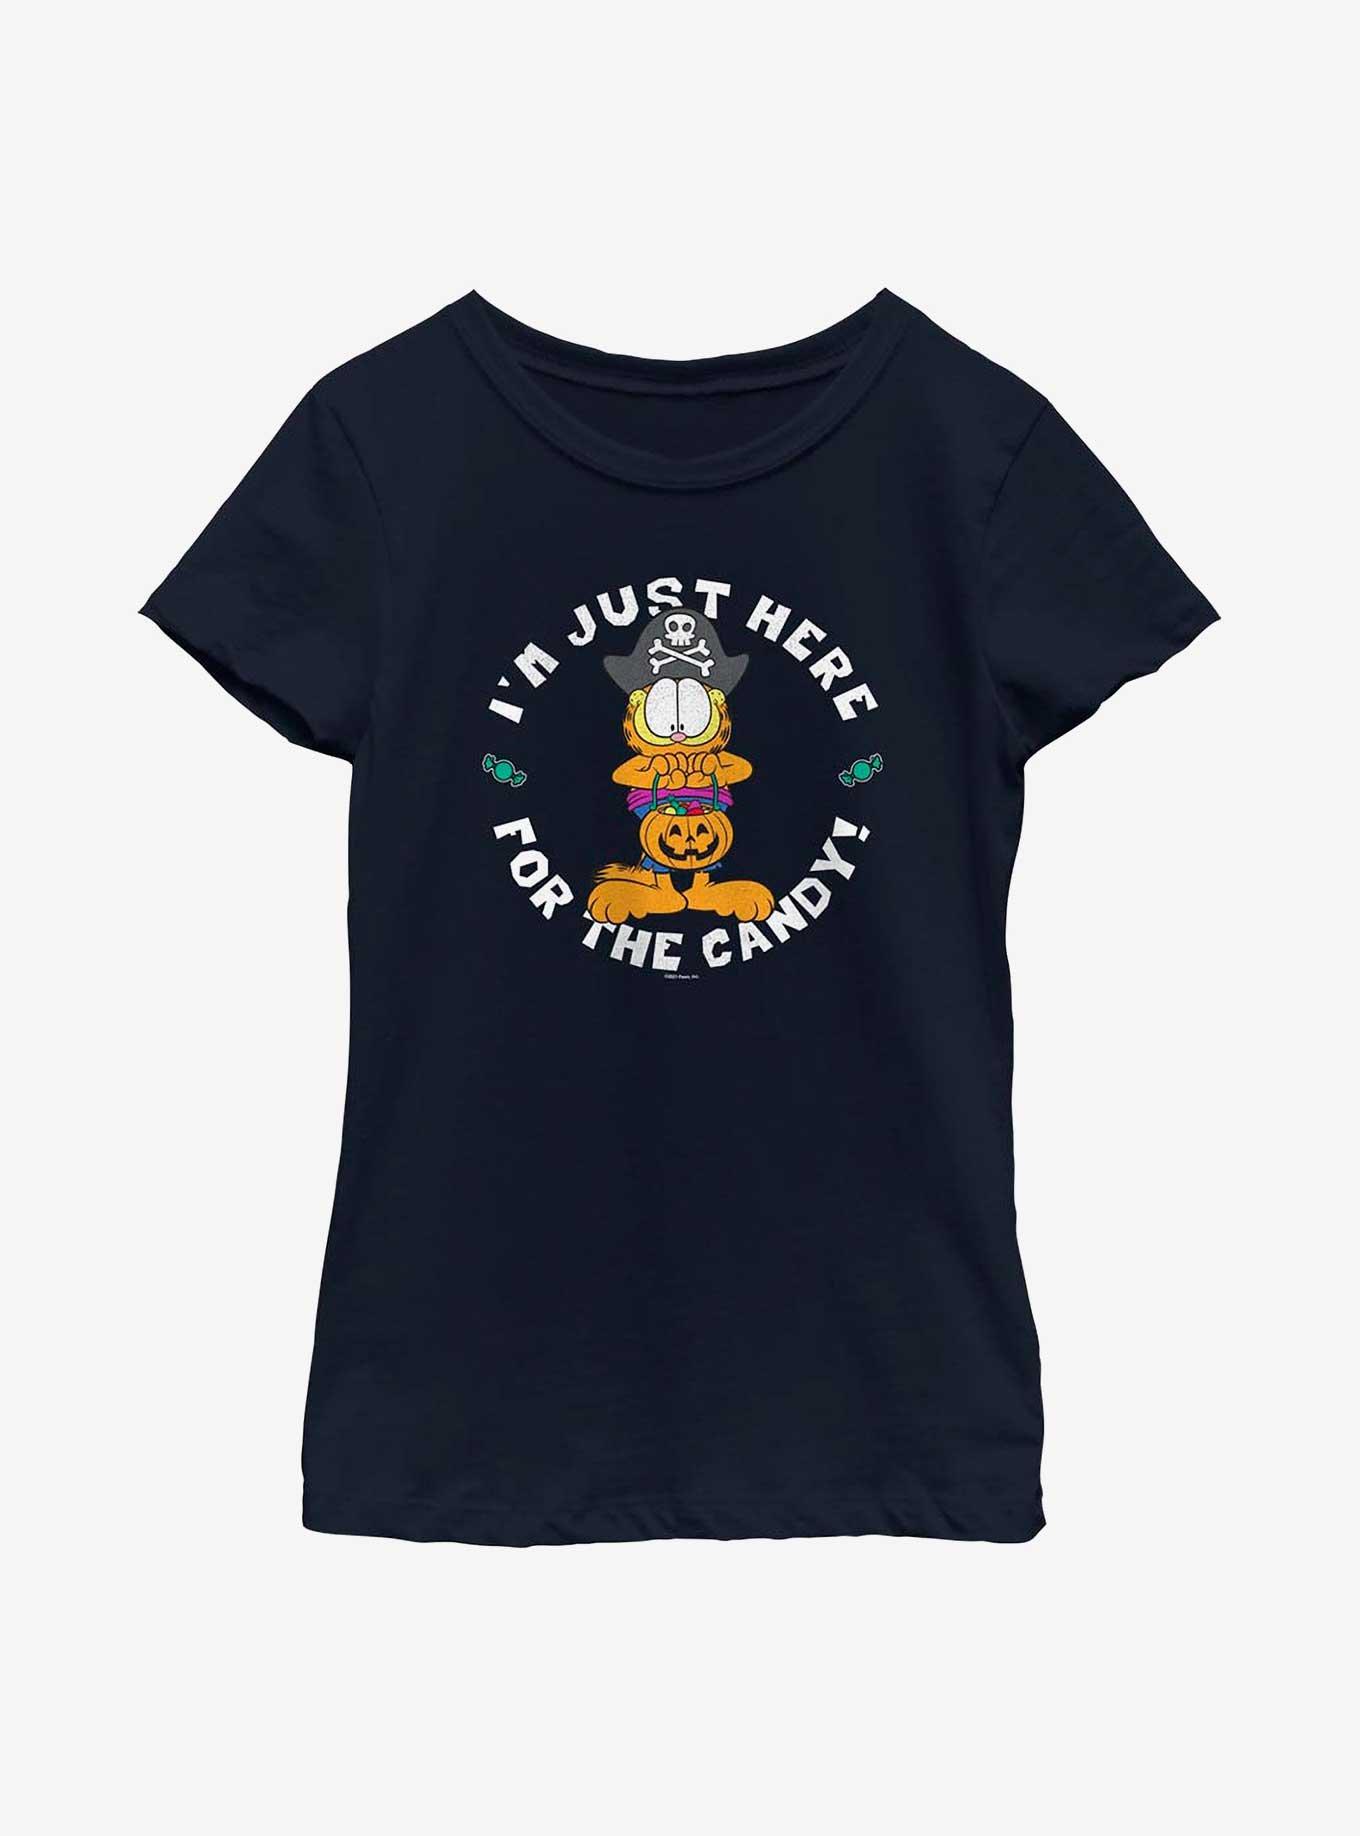 Garfield Here For Candy Youth Girl's T-Shirt, NAVY, hi-res